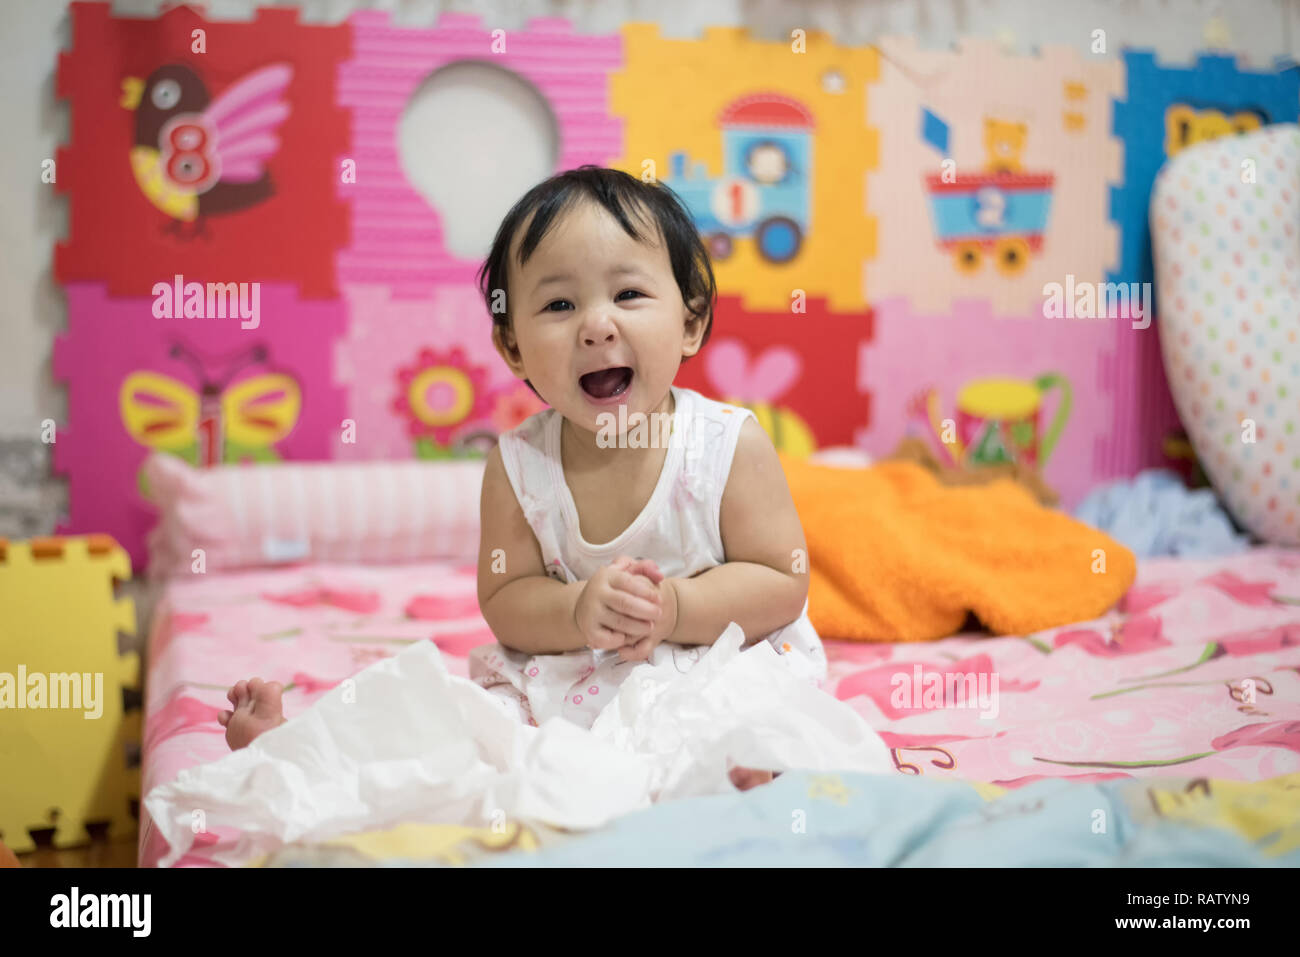 asia baby happy on the bed / baby child laughing face open your mouth and clap / beautiful baby girl expressive adorable happy cute smiling infant col Stock Photo